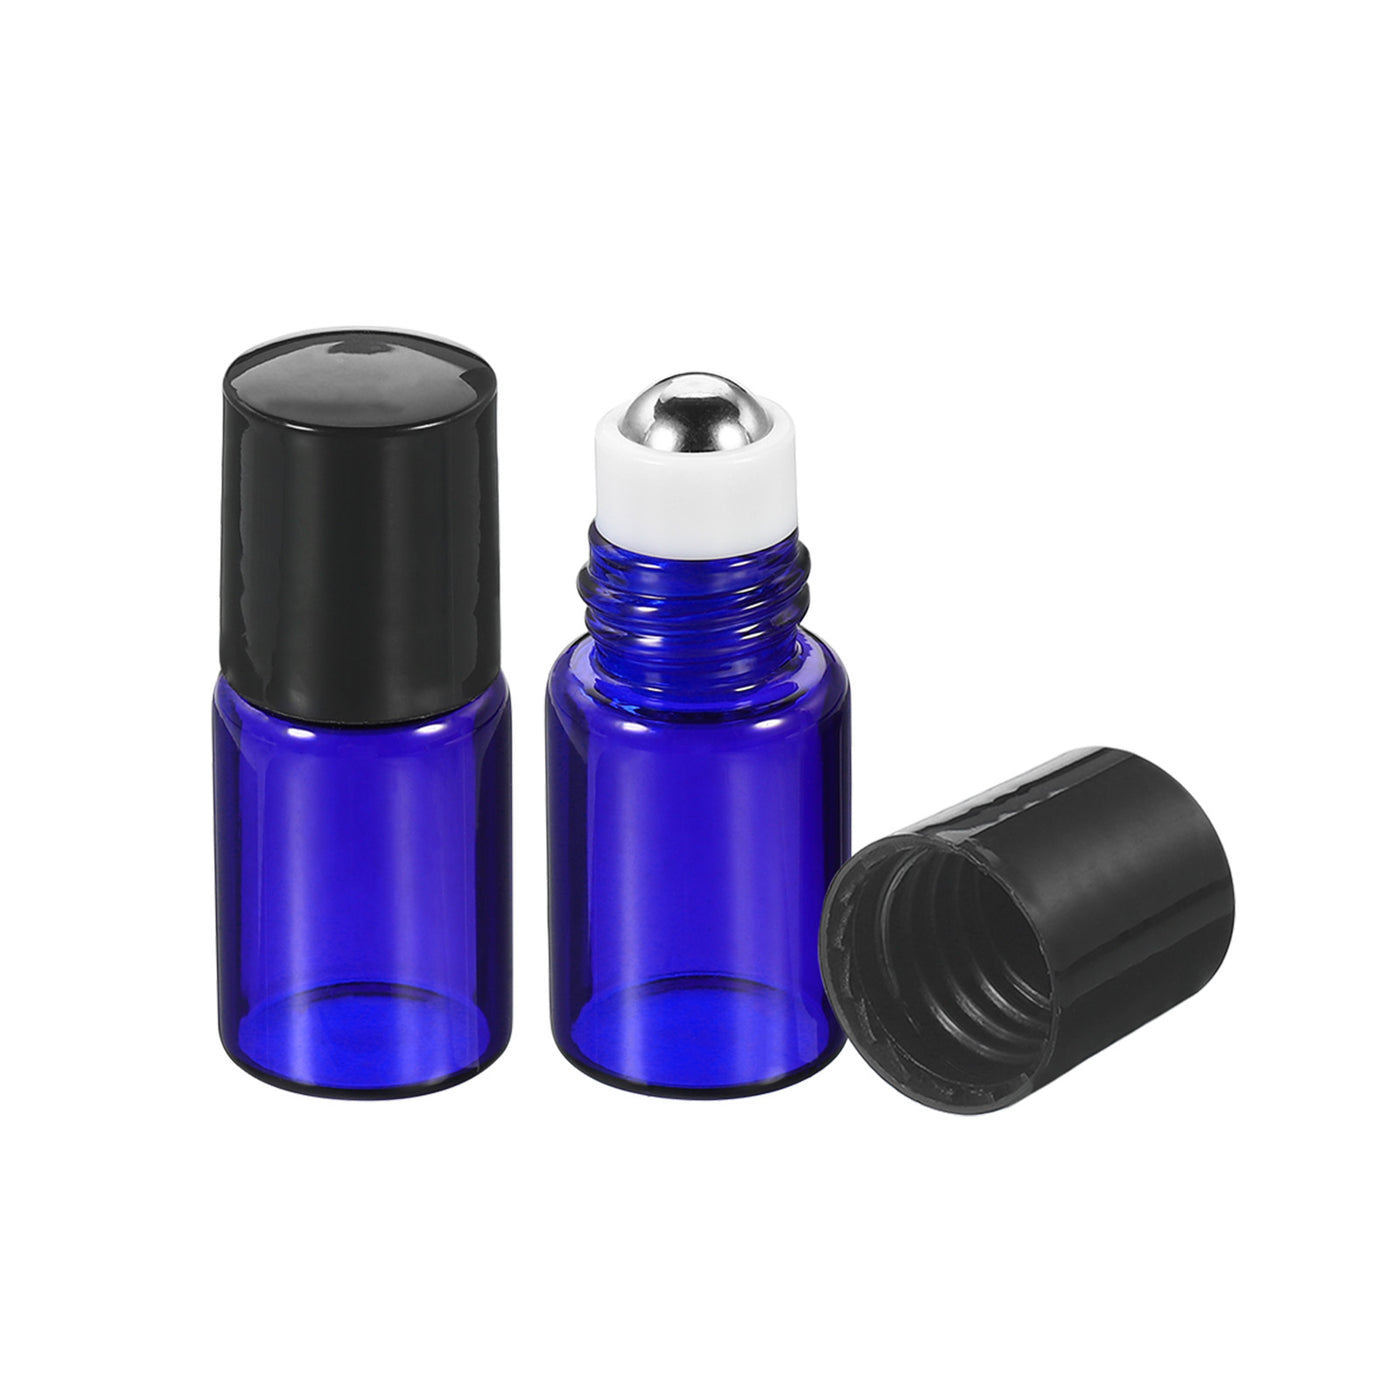 Harfington 2mL Roller Bottles, 3 Pack Glass Essential Oil Roller Balls with Cover Cap Refillable Containers, Blue